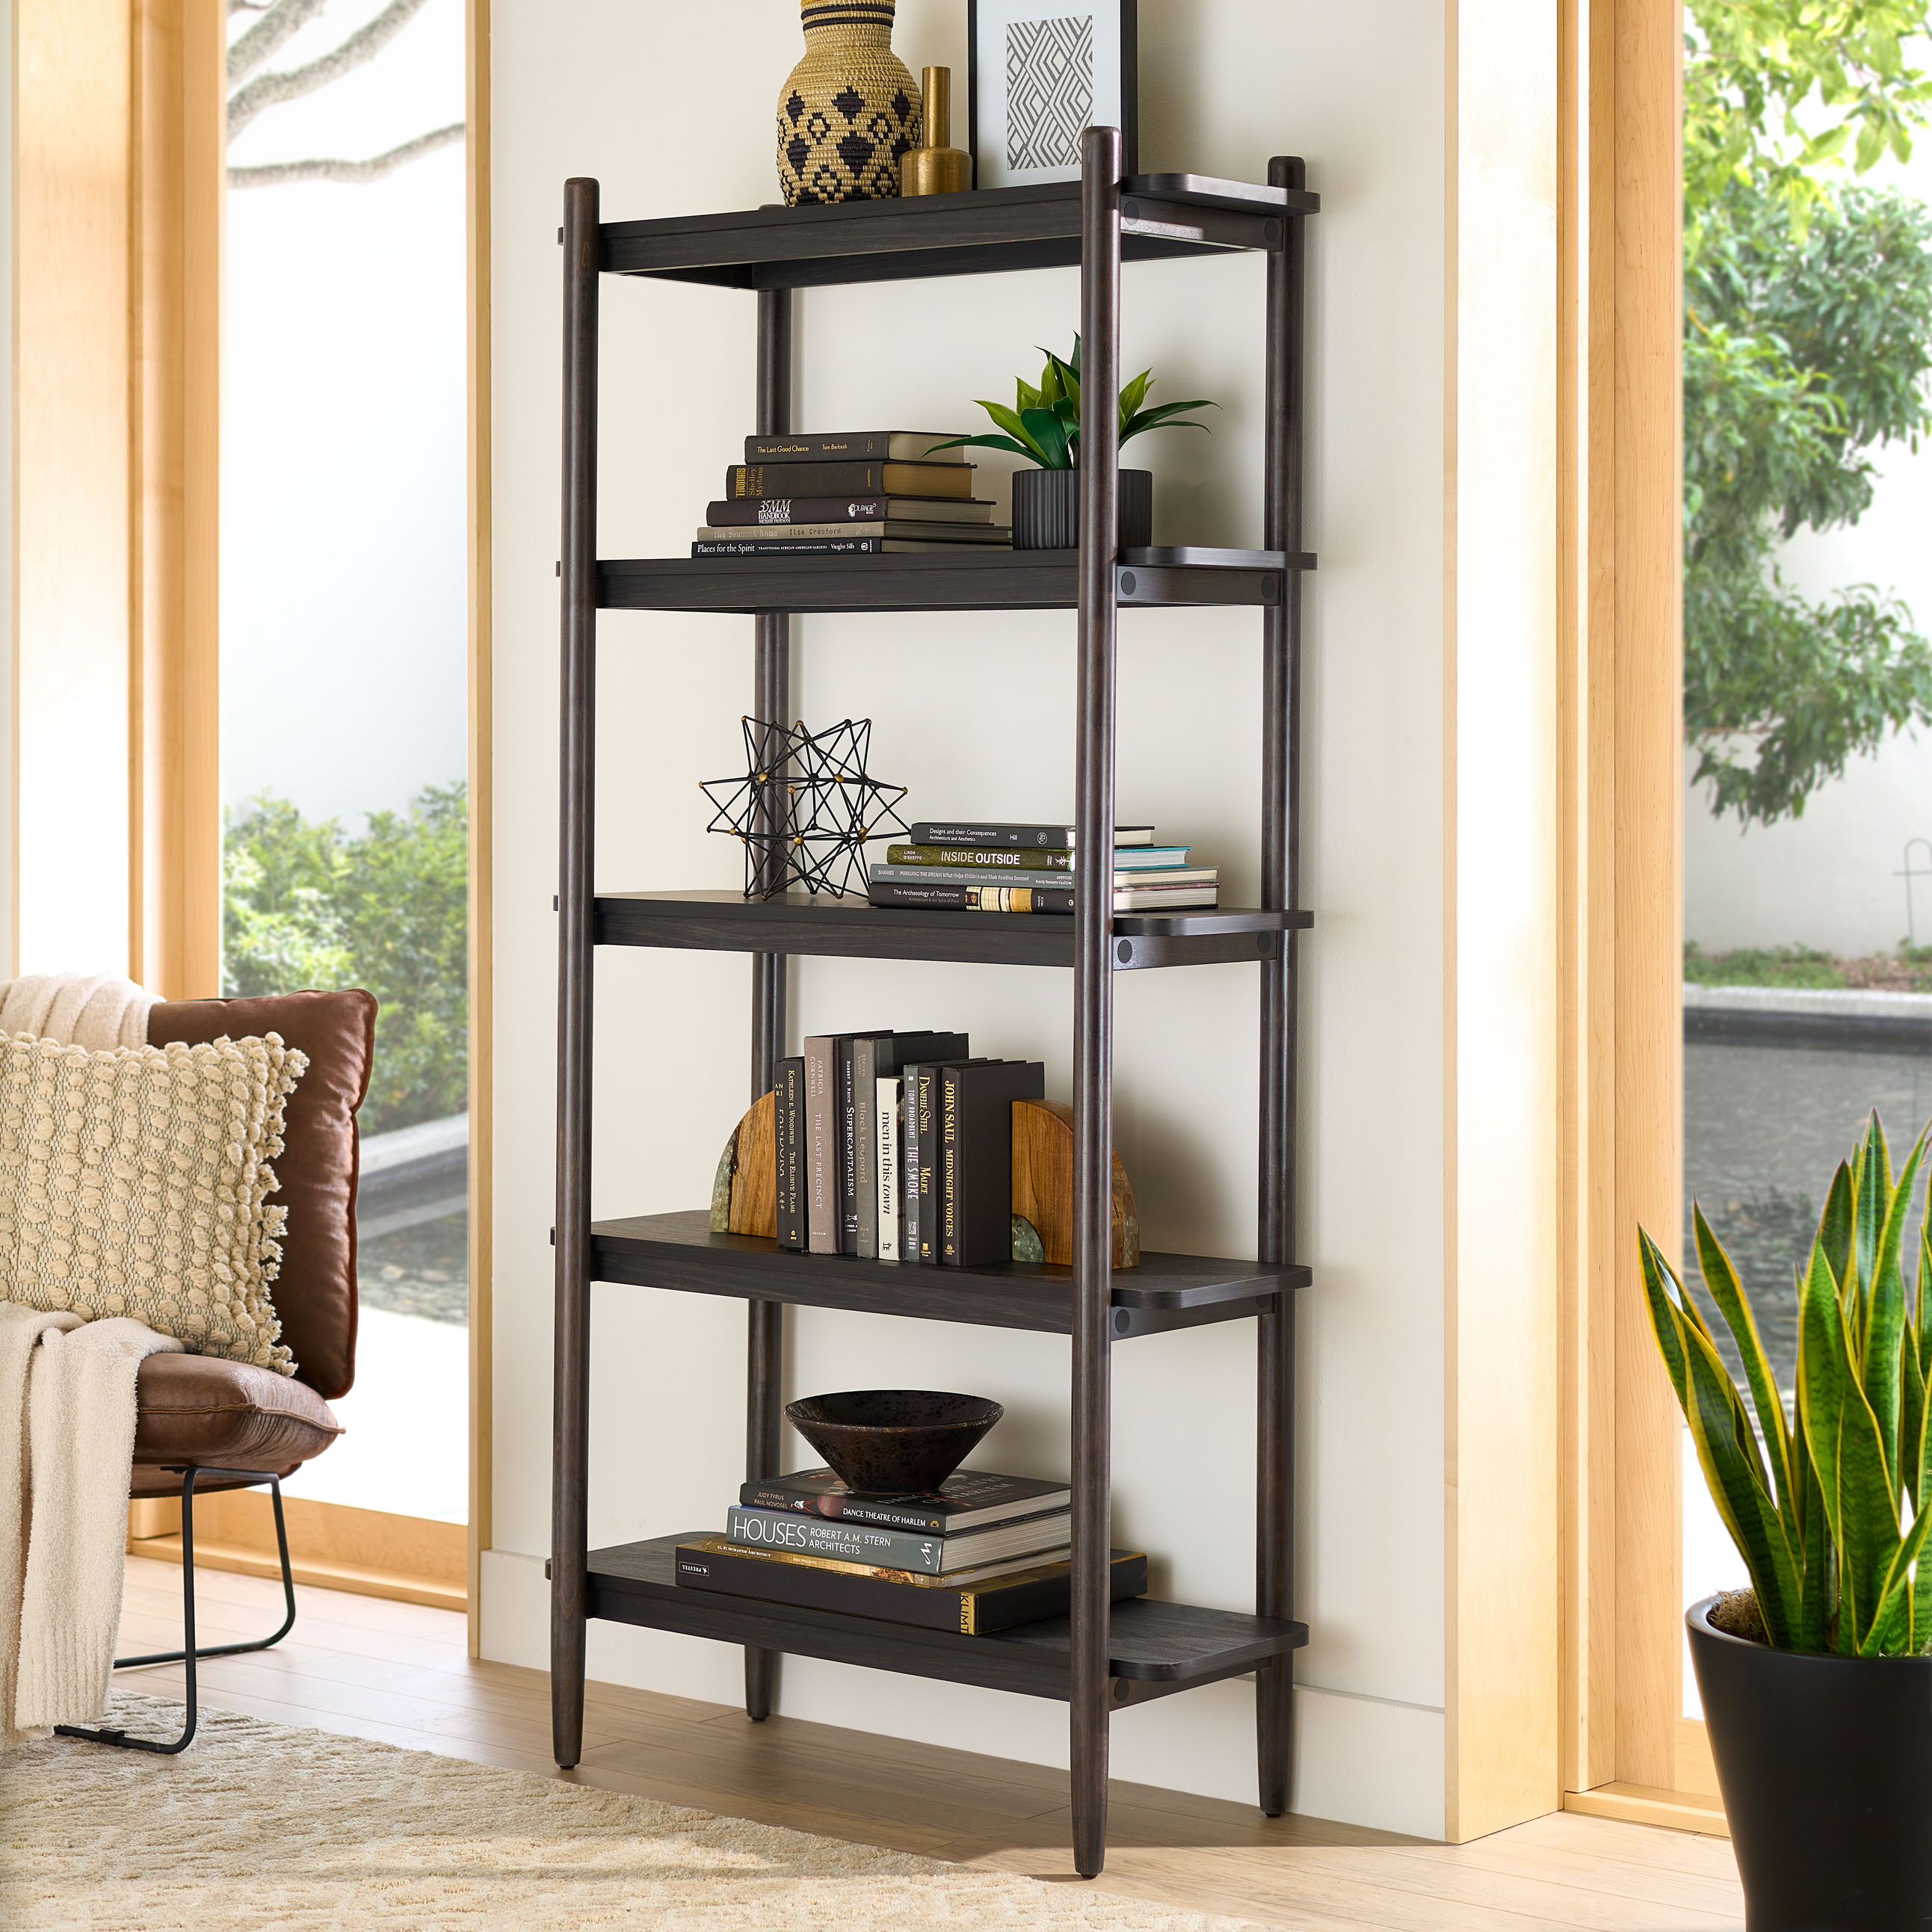 Better Homes & Gardens Springwood 5 Shelf Bookcase with Solid Wood Frame, Charcoal Finish - image 1 of 10